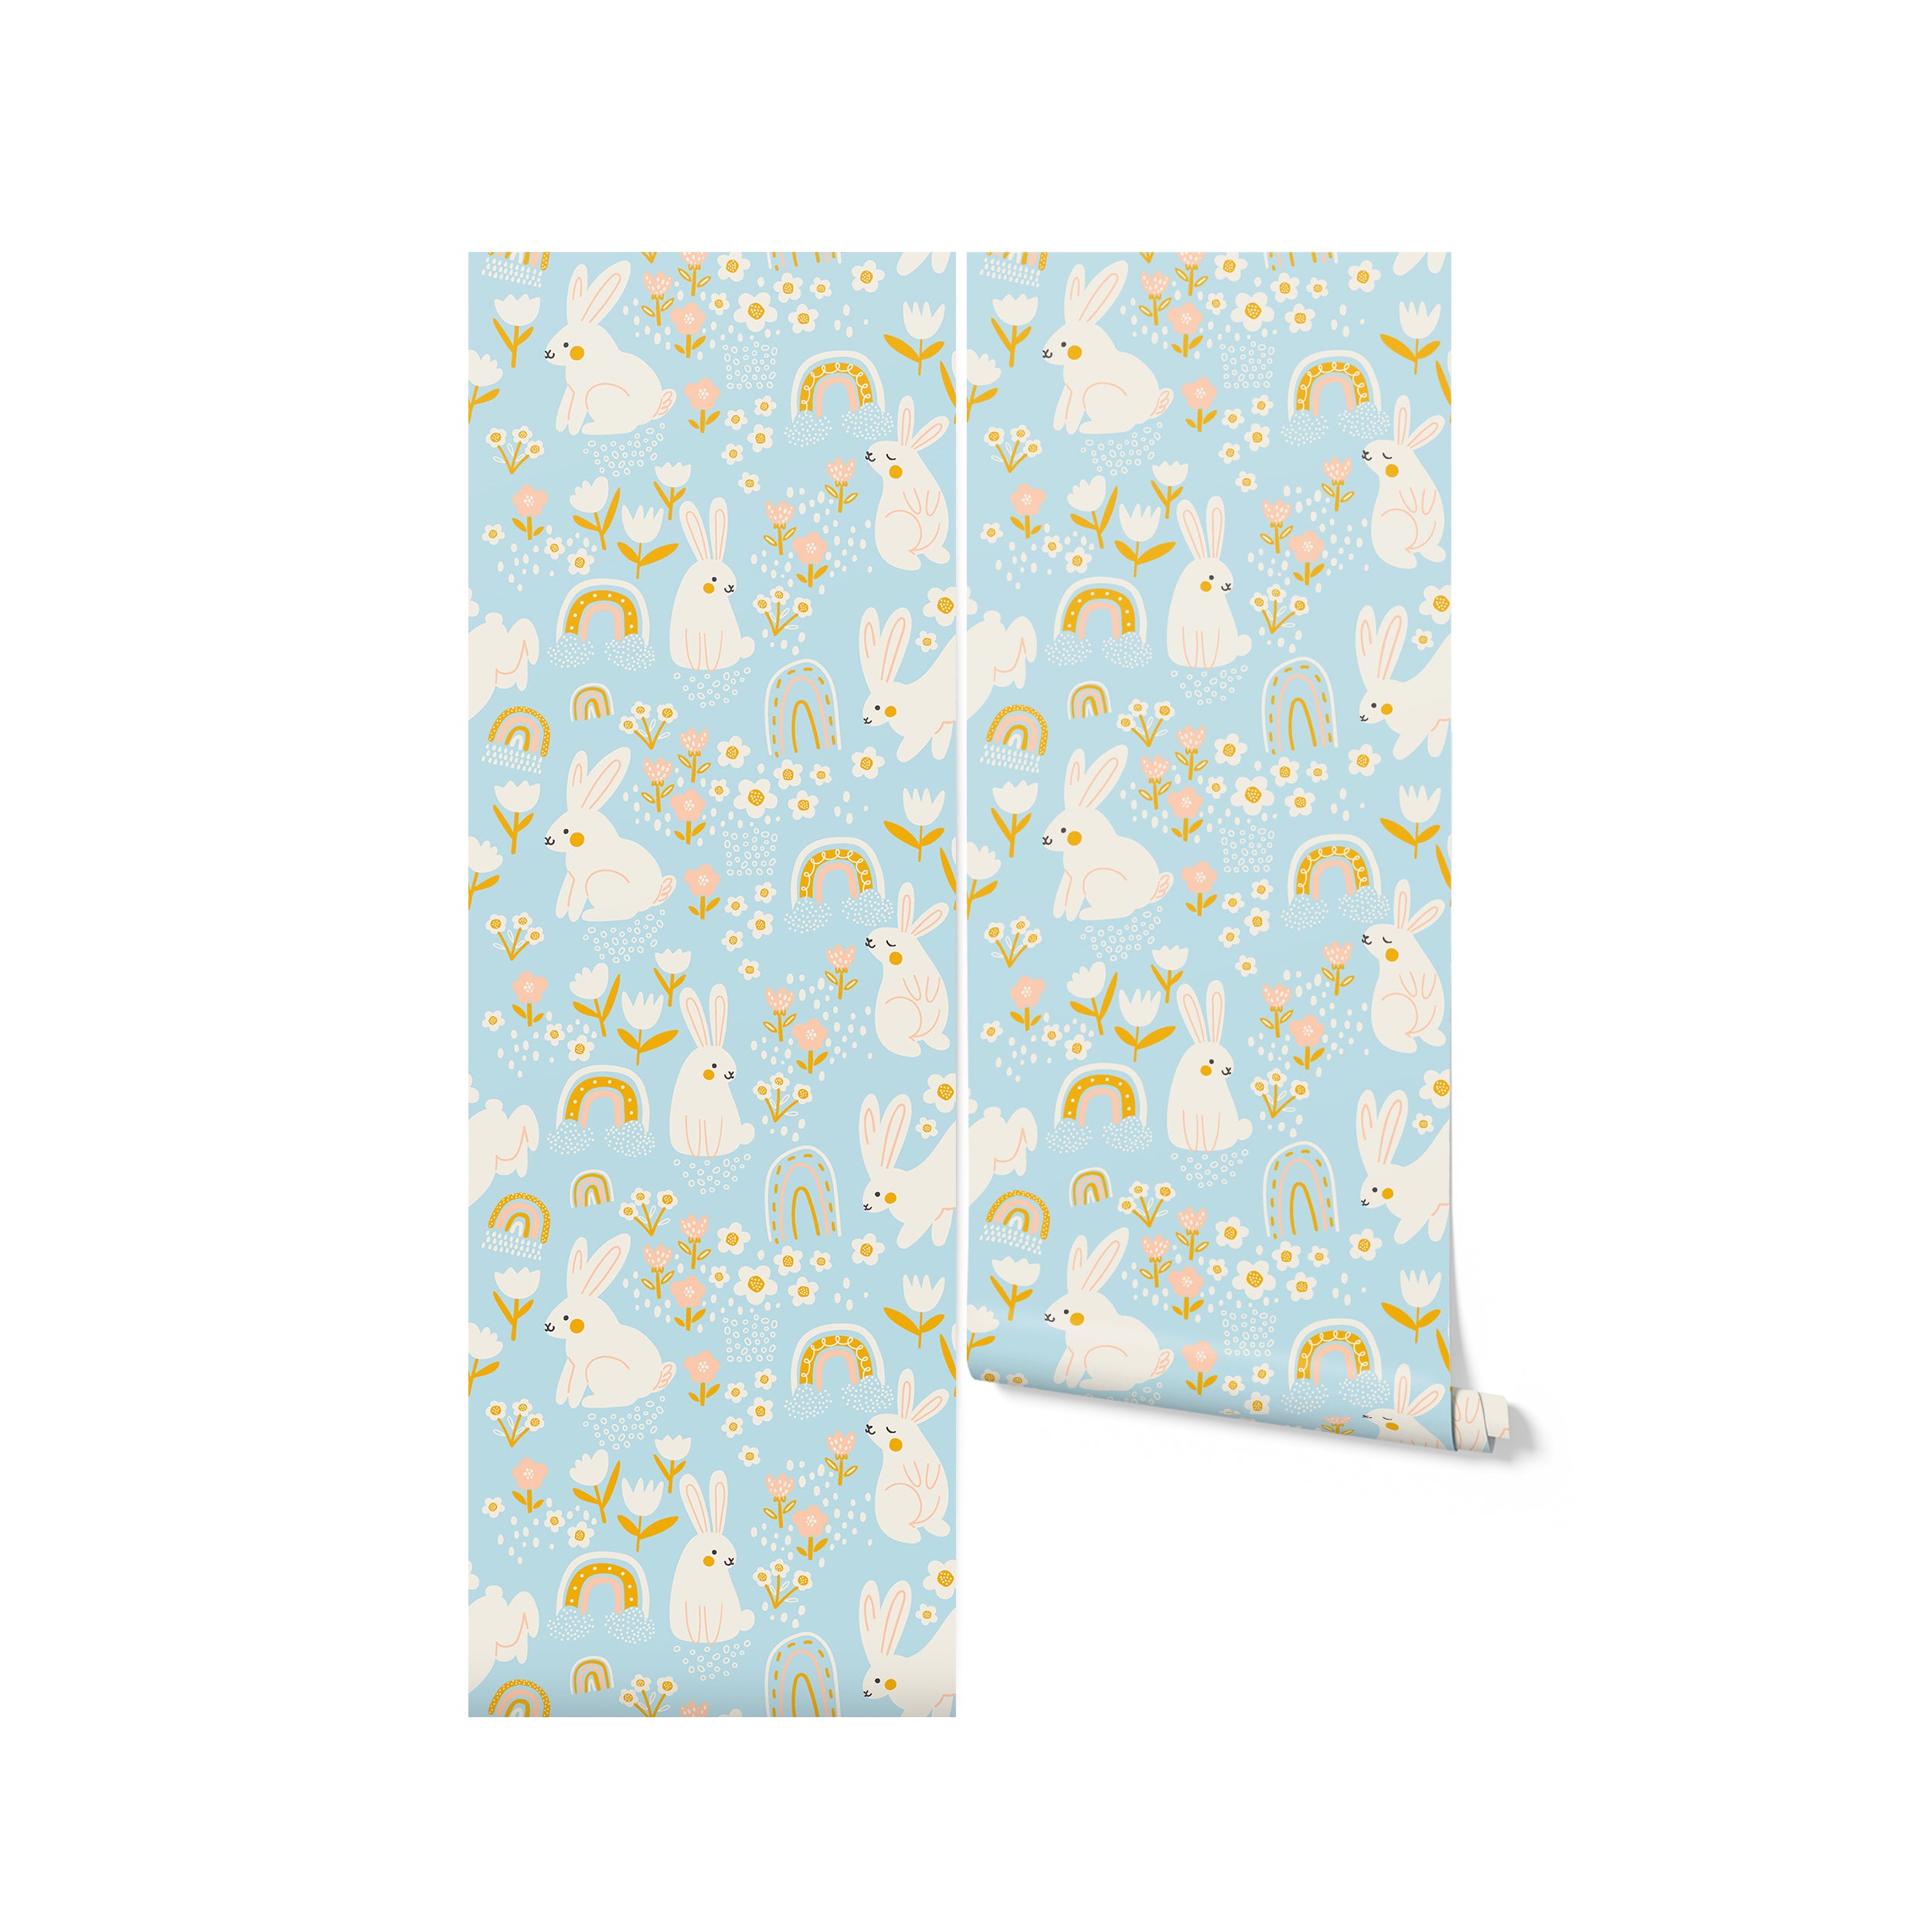 Roll of children’s wallpaper with a delightful design of white rabbits and multicolored rainbows set against a light blue background, perfect for creating a cheerful and inviting nursery space.